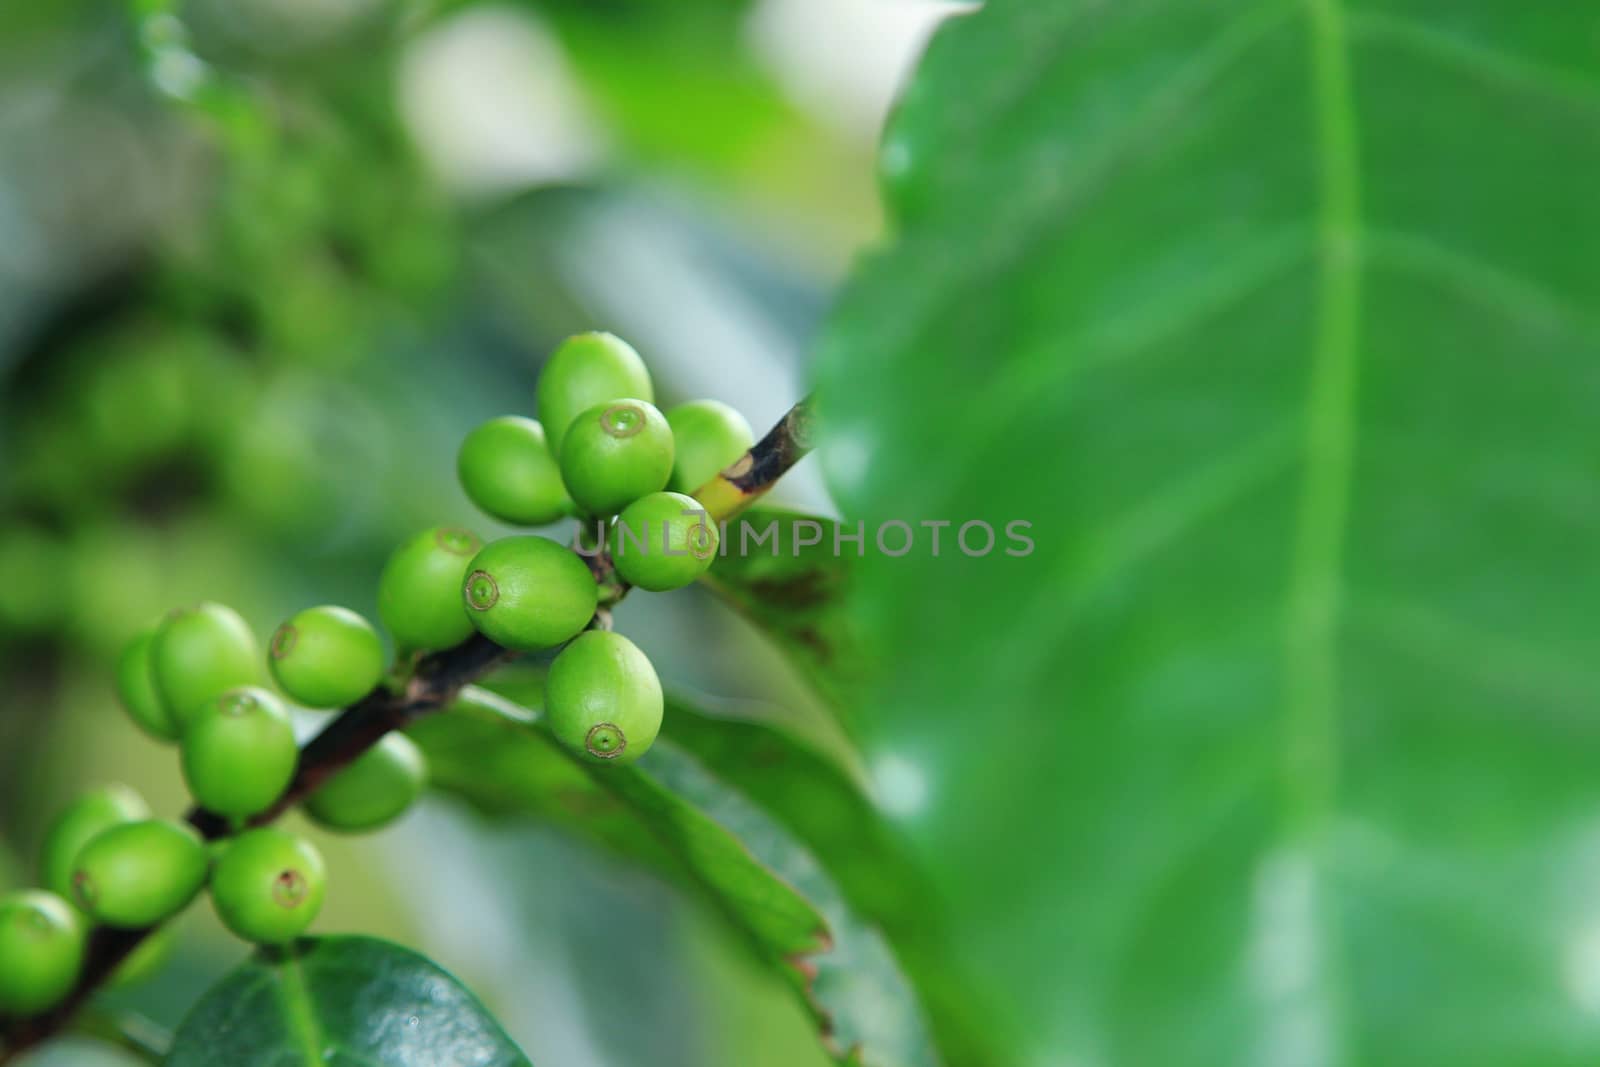 Coffee beans on plant by foto76